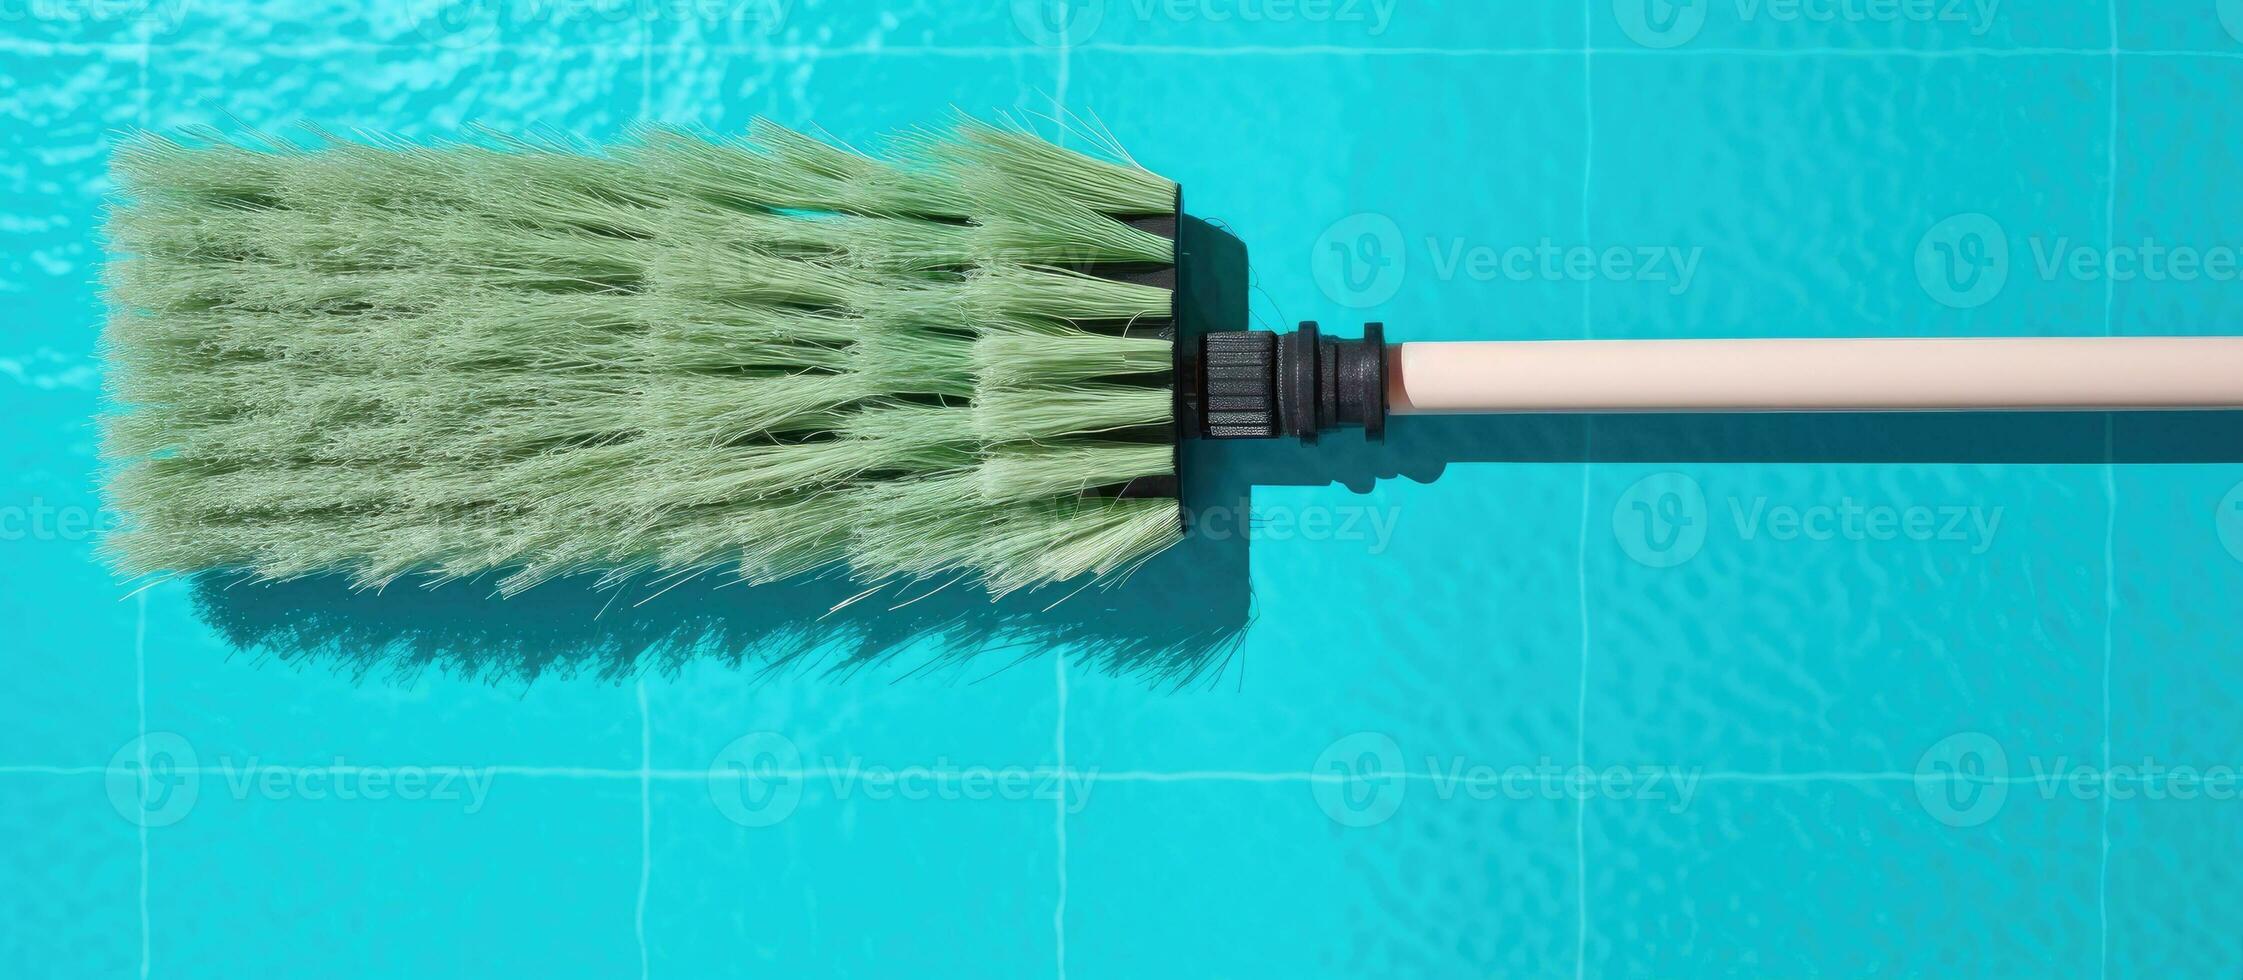 Photo of a blue pool with a green brush floating on the surface with copy space